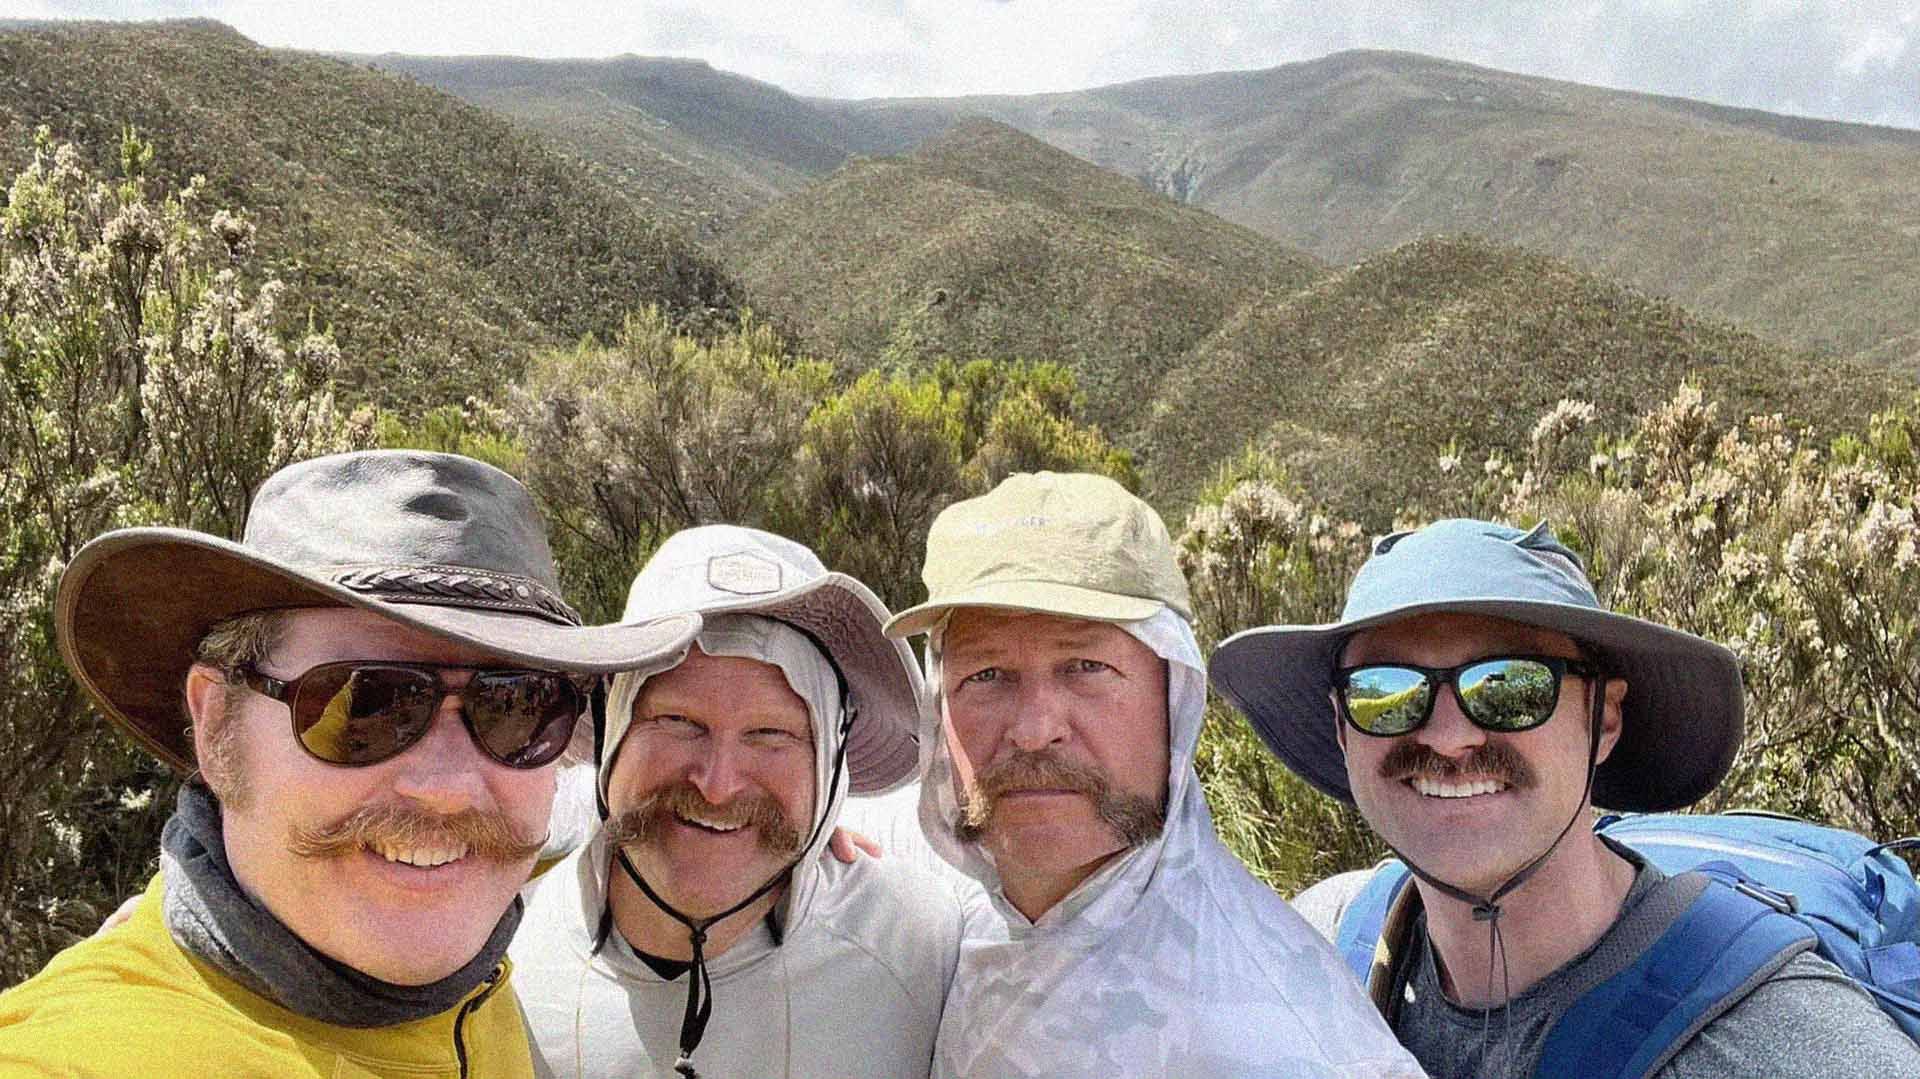 Four Movember supporters, bearing magnificent moustaches, smiling to camera. Spectacular verdant hills from Africa's Mount Kilimanjaro are visible behind them.